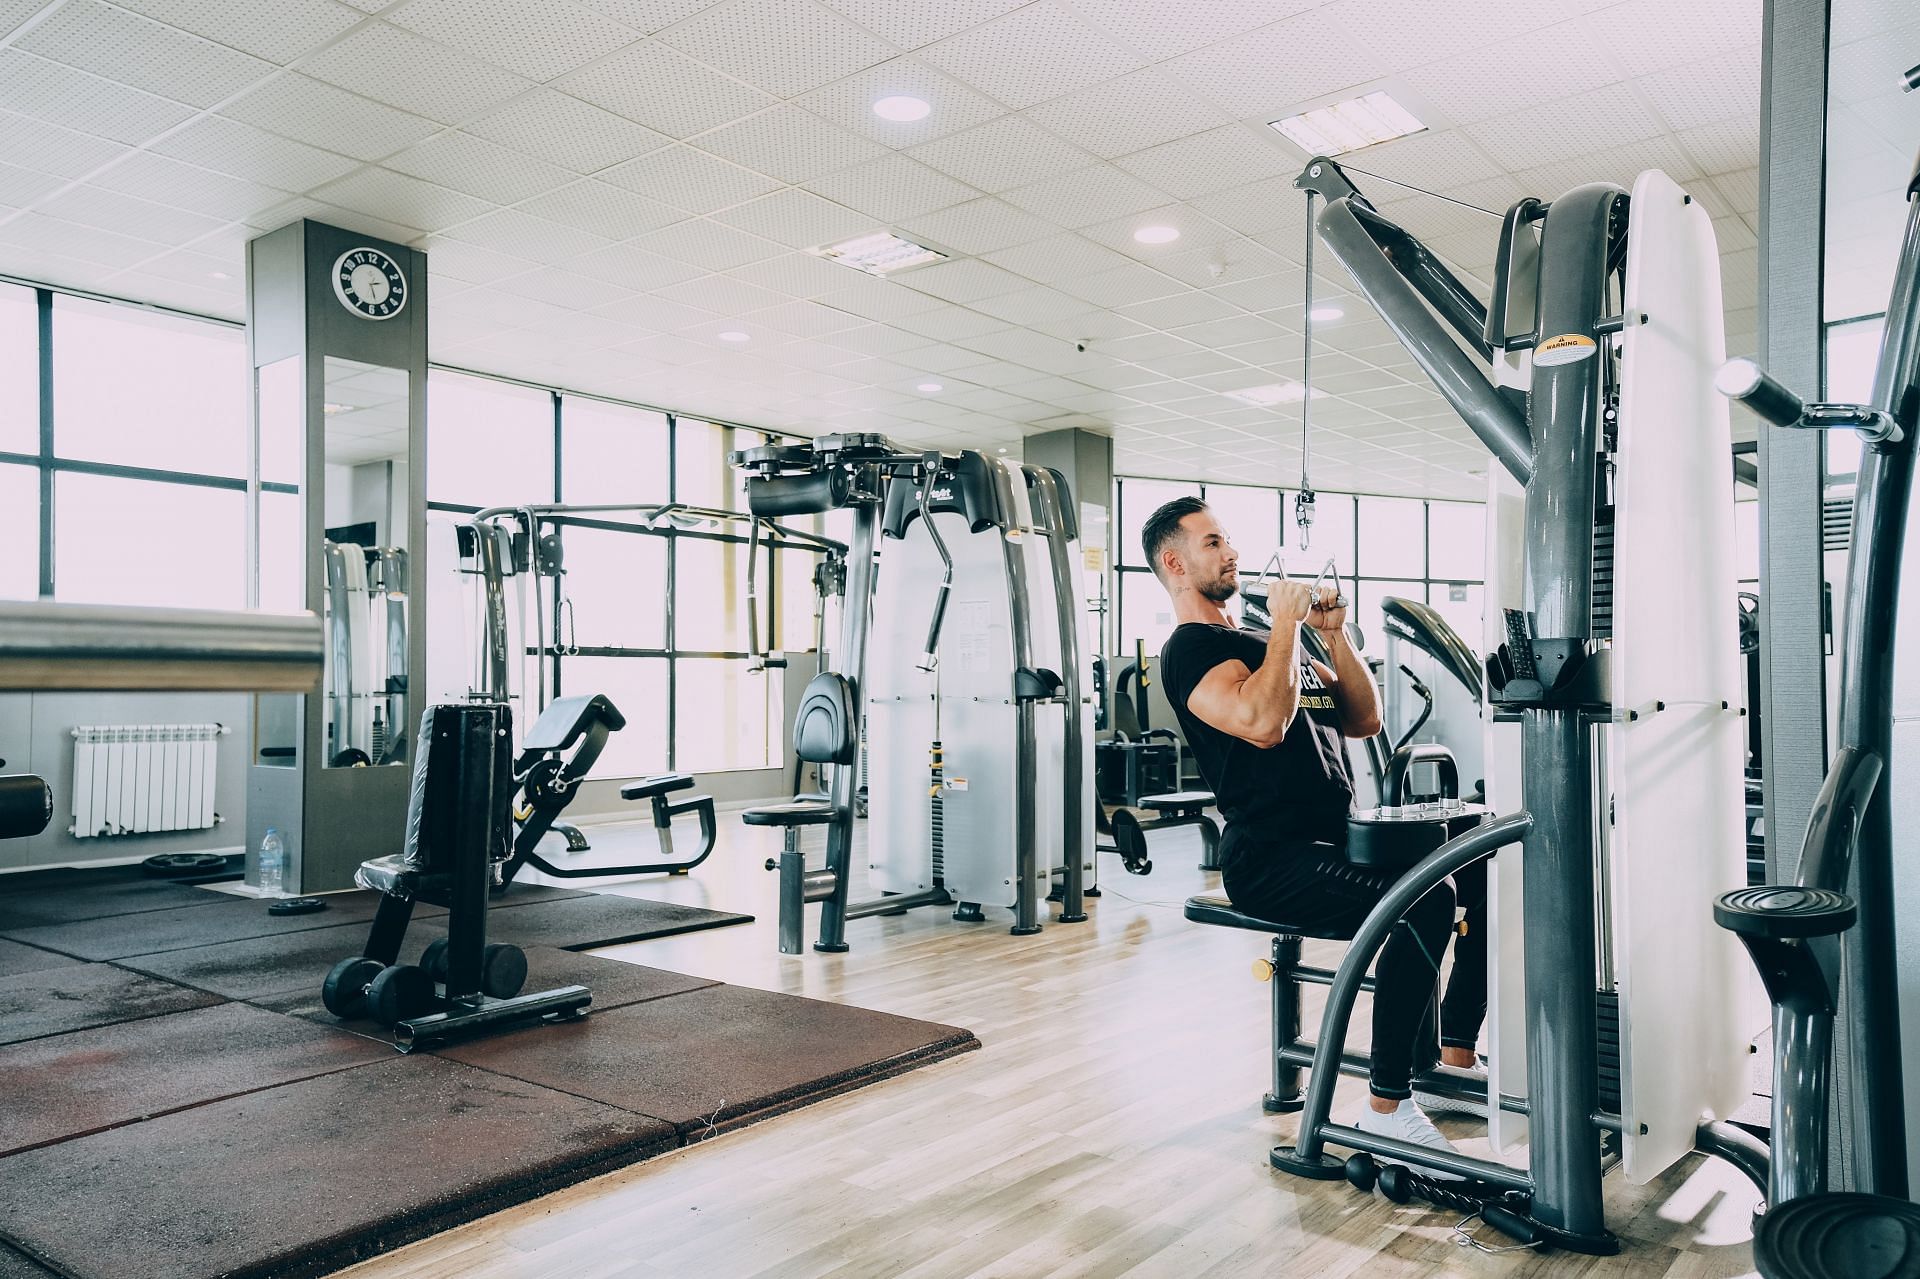 How Much Does A Smith Machine Bar Weigh? (Image via Unsplash)